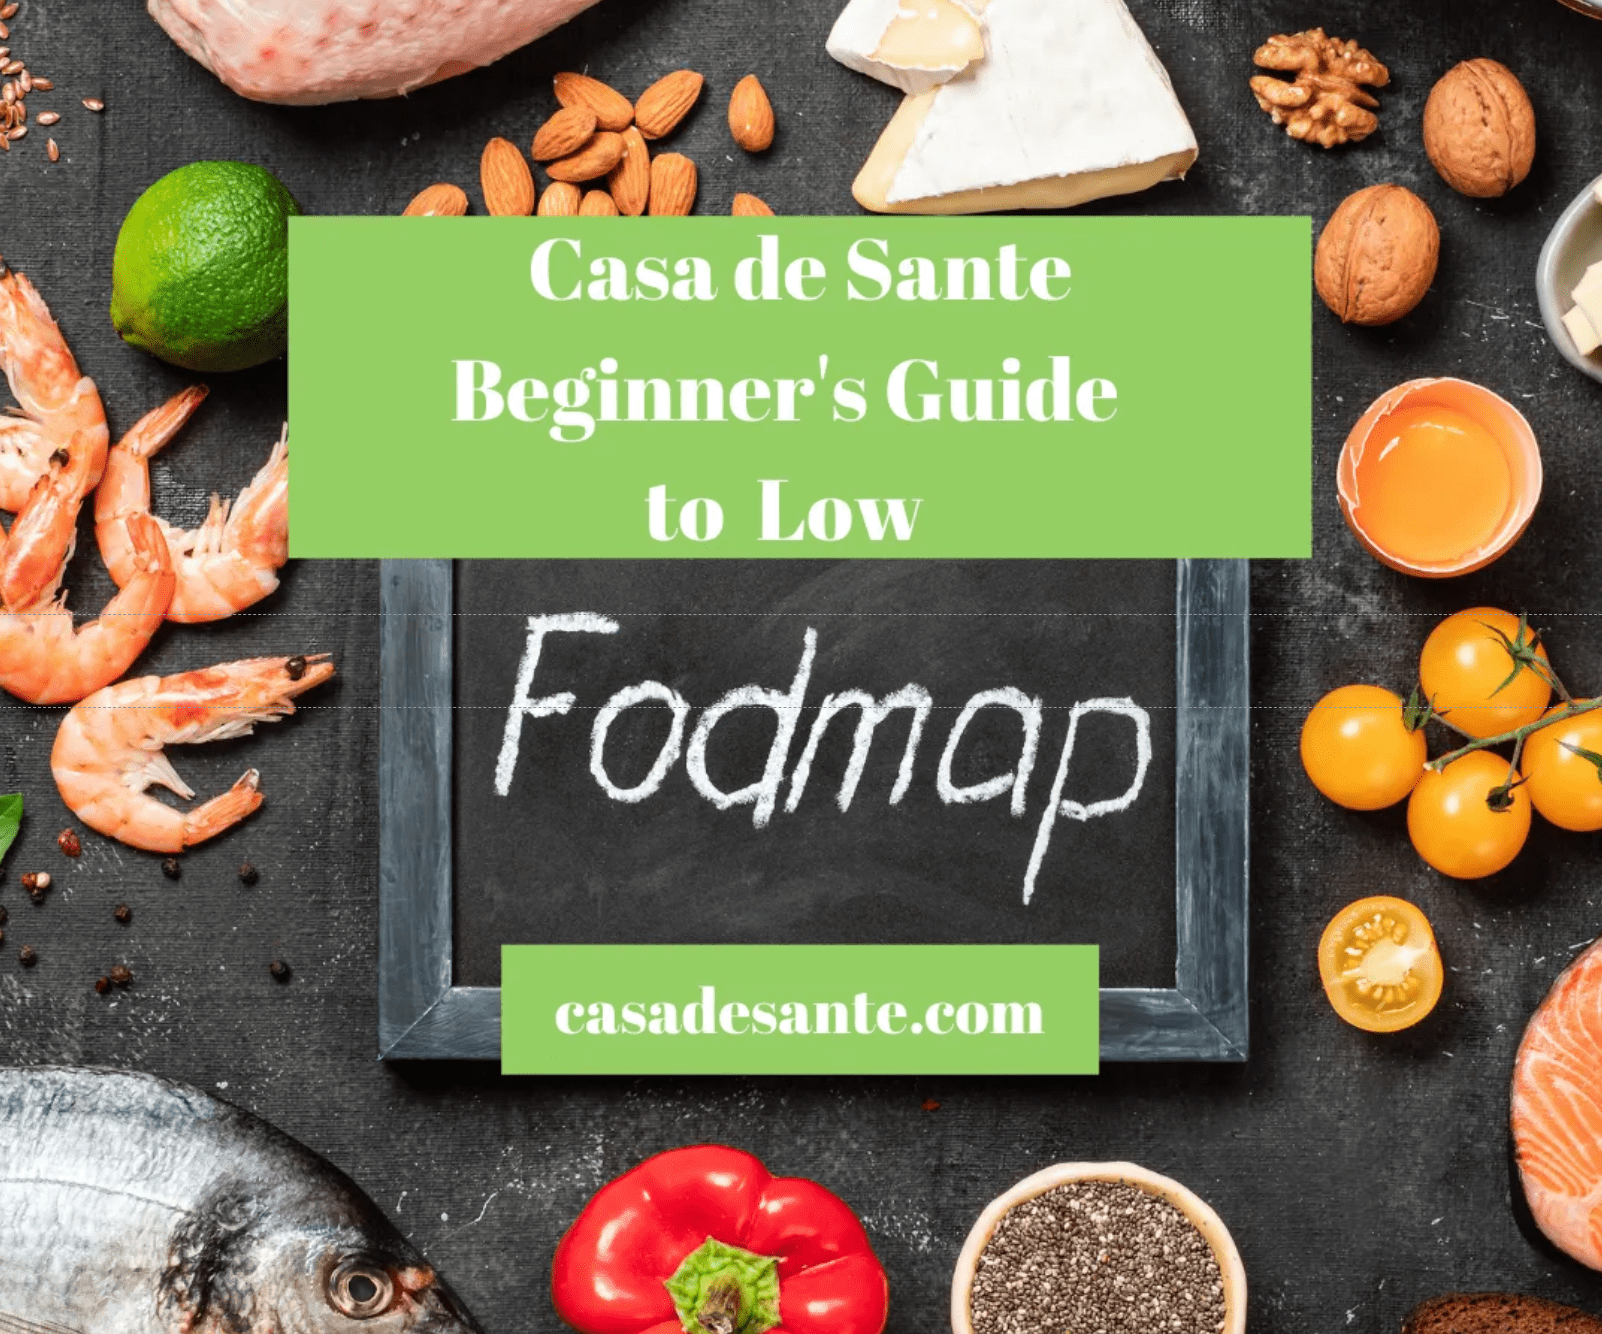 It's important to note that the low FODMAP diet is not a lifelong diet, but rather a short-term approach to identify and manage trigger foods. Once trigger foods have been identified, individuals can create a personalized long-term eating plan that minimizes symptoms while still allowing for a varied and balanced diet. Working with a registered dietitian who specializes in the low FODMAP diet can be helpful in navigating the elimination and reintroduction phases and developing an individualized plan.